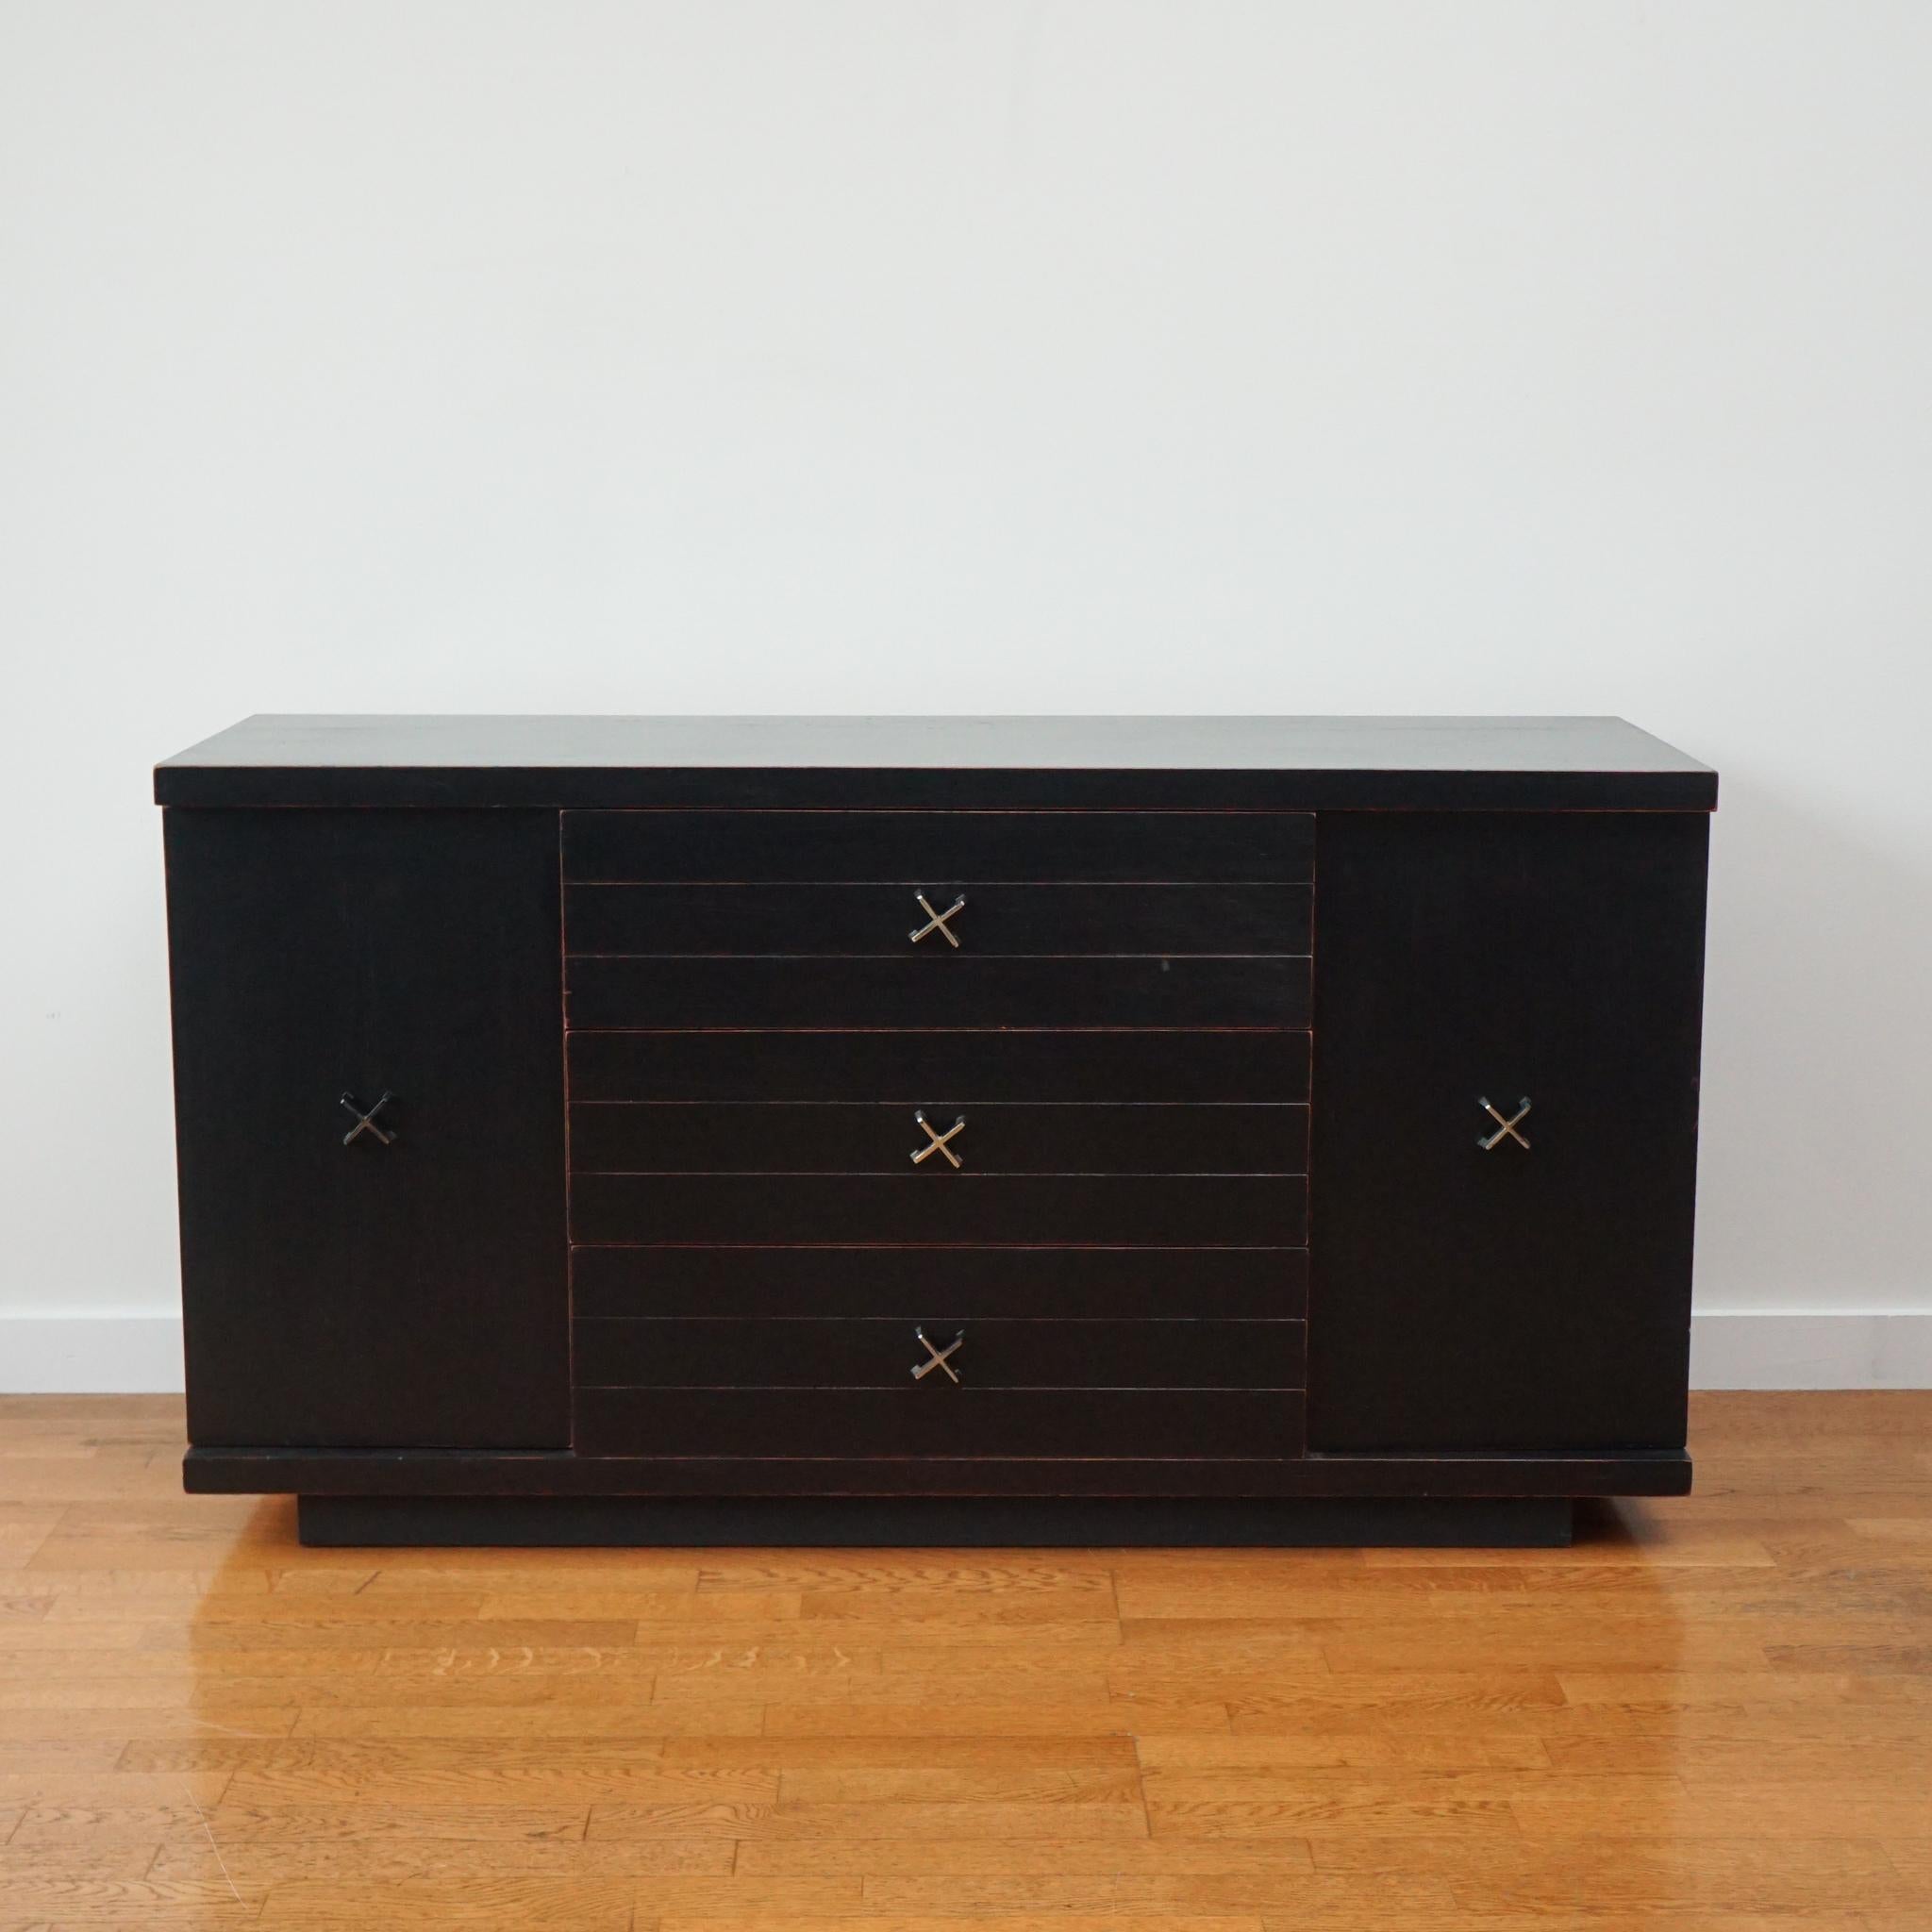 Handsome mid-century modern sideboard in a distressed matte black finish. 
Three center drawers and side cabinets with built-in shelves provide abundant storage.  The X-crossed nickel hardware is a nod to the work of Paul Frankl. 